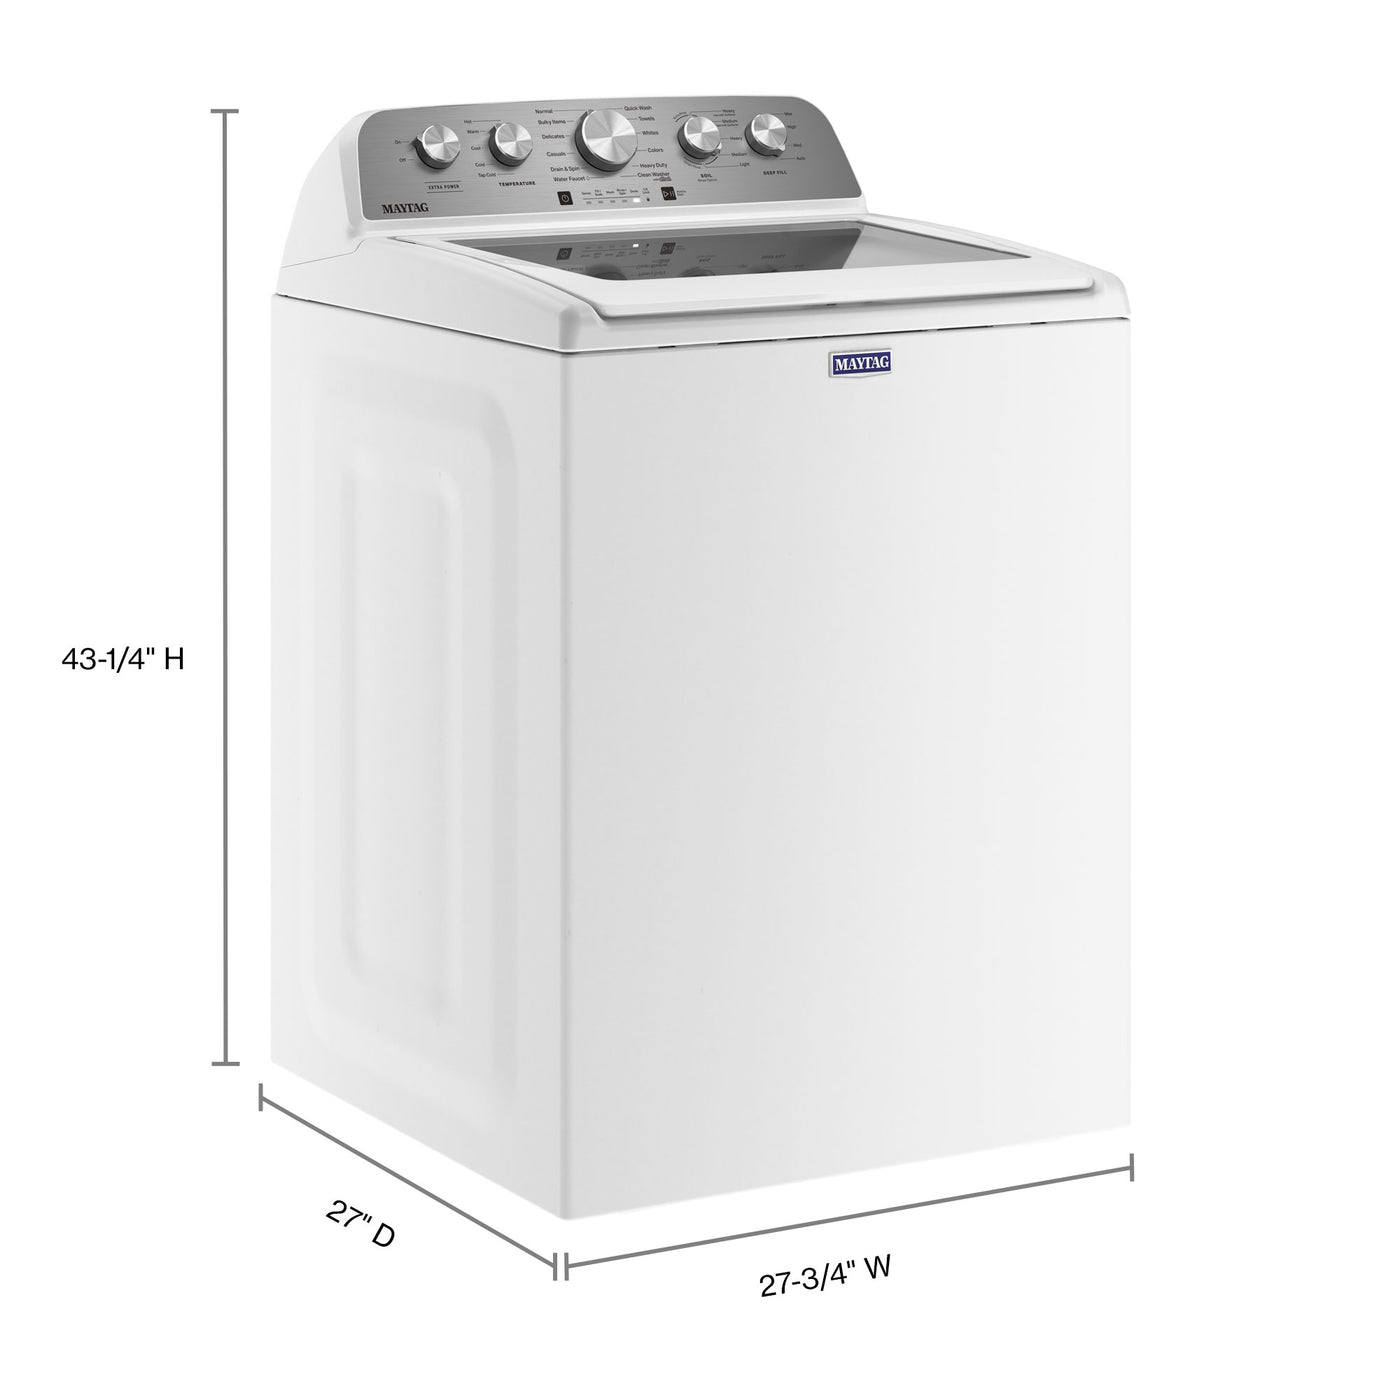 Maytag White Top Load Washer with Extra Power (5.5 cu. ft.) - MVW5430MW